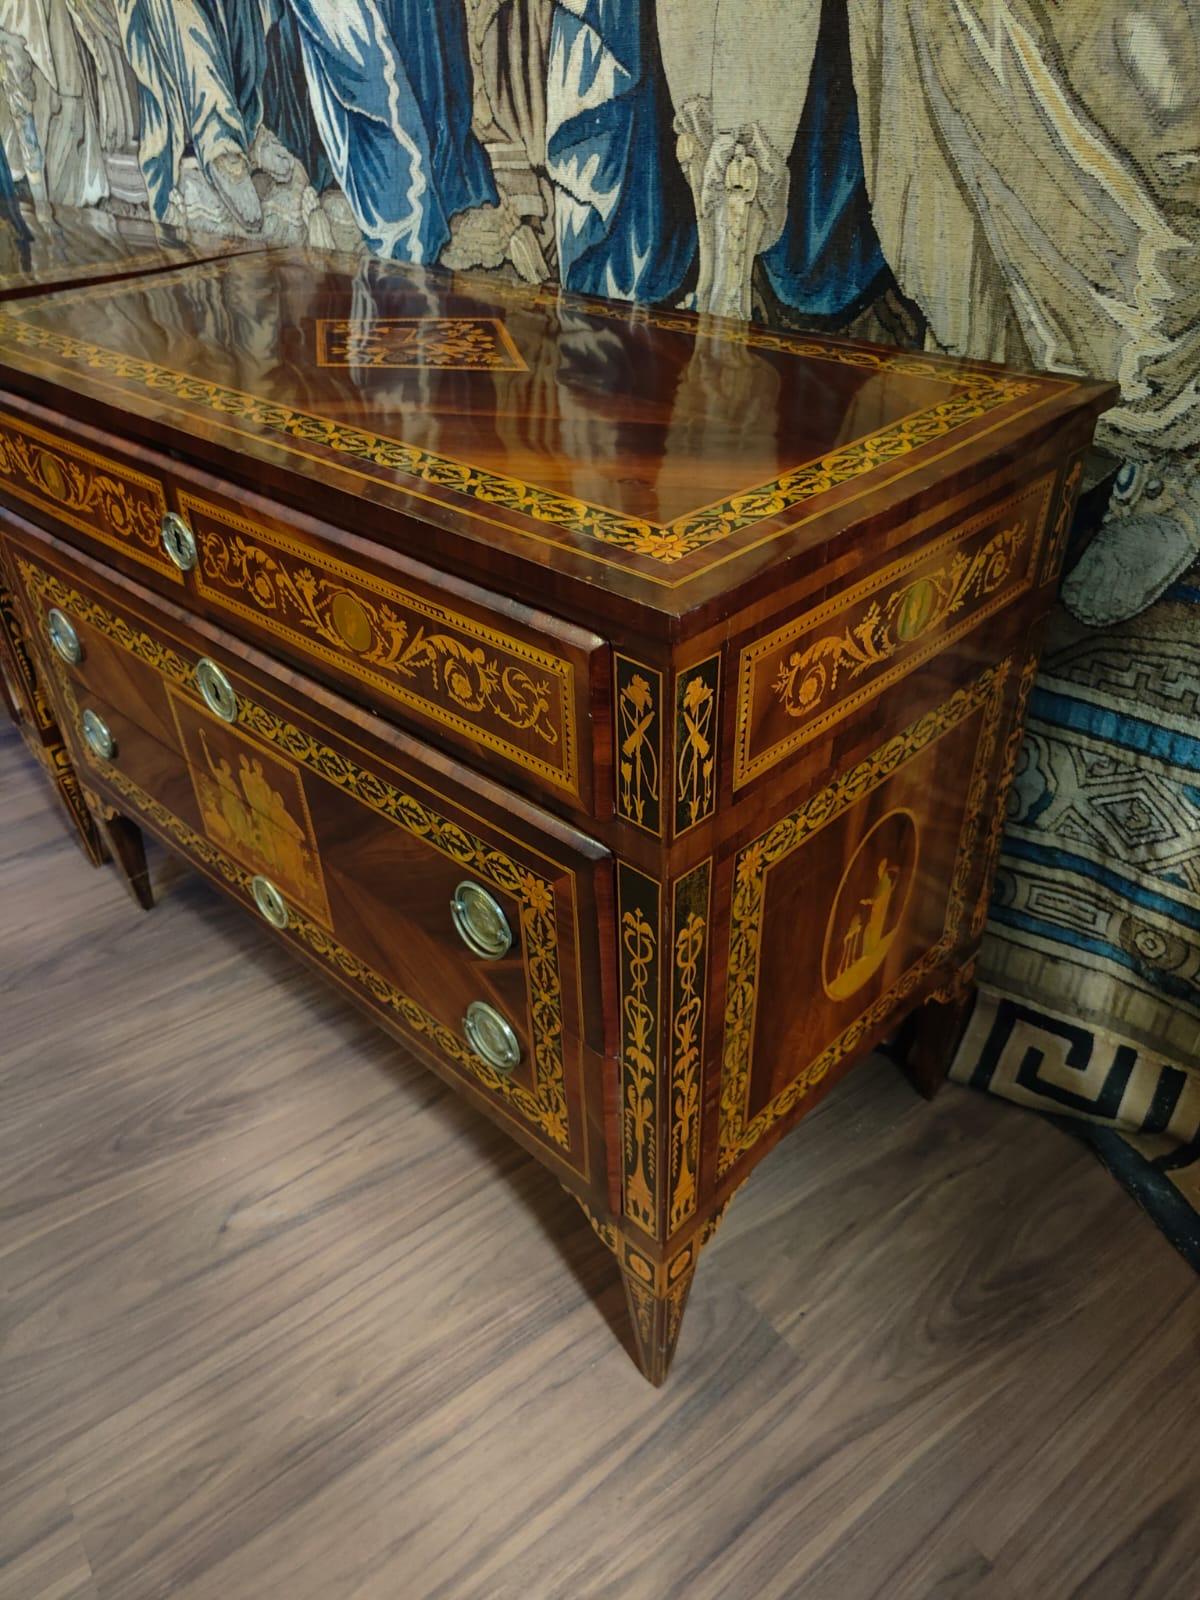 Beautiful pair of Louis XVI chests of drawers  from the school of Giuseppe Maggiolini.
This pair of chests of drawers are characterized by meticulous inlays in various woods, as can be seen from the photos the chests of drawers are inlaid in all its